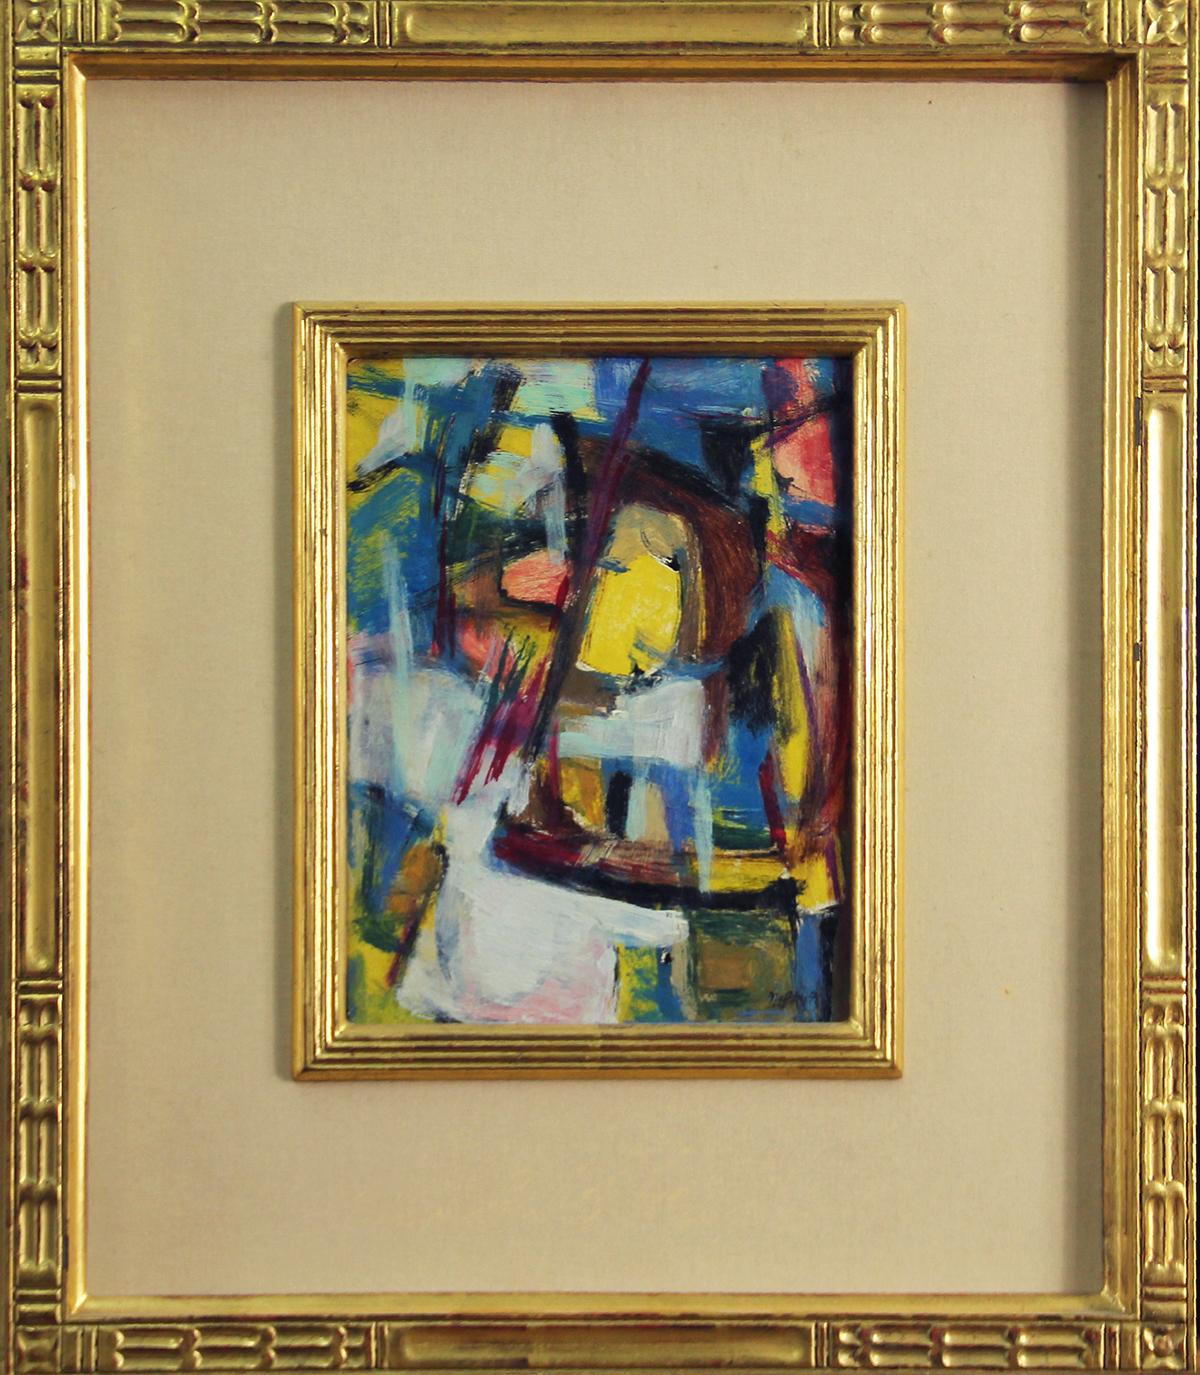 "Abstract # 40" by Leonard Nelson is an 10" x 8" oil on board abstract painting from 1955. It comes from the estate of the artist. The painting is framed, signed and dated in the lower right "Nelson 55". Additional shipping options and quotes by the